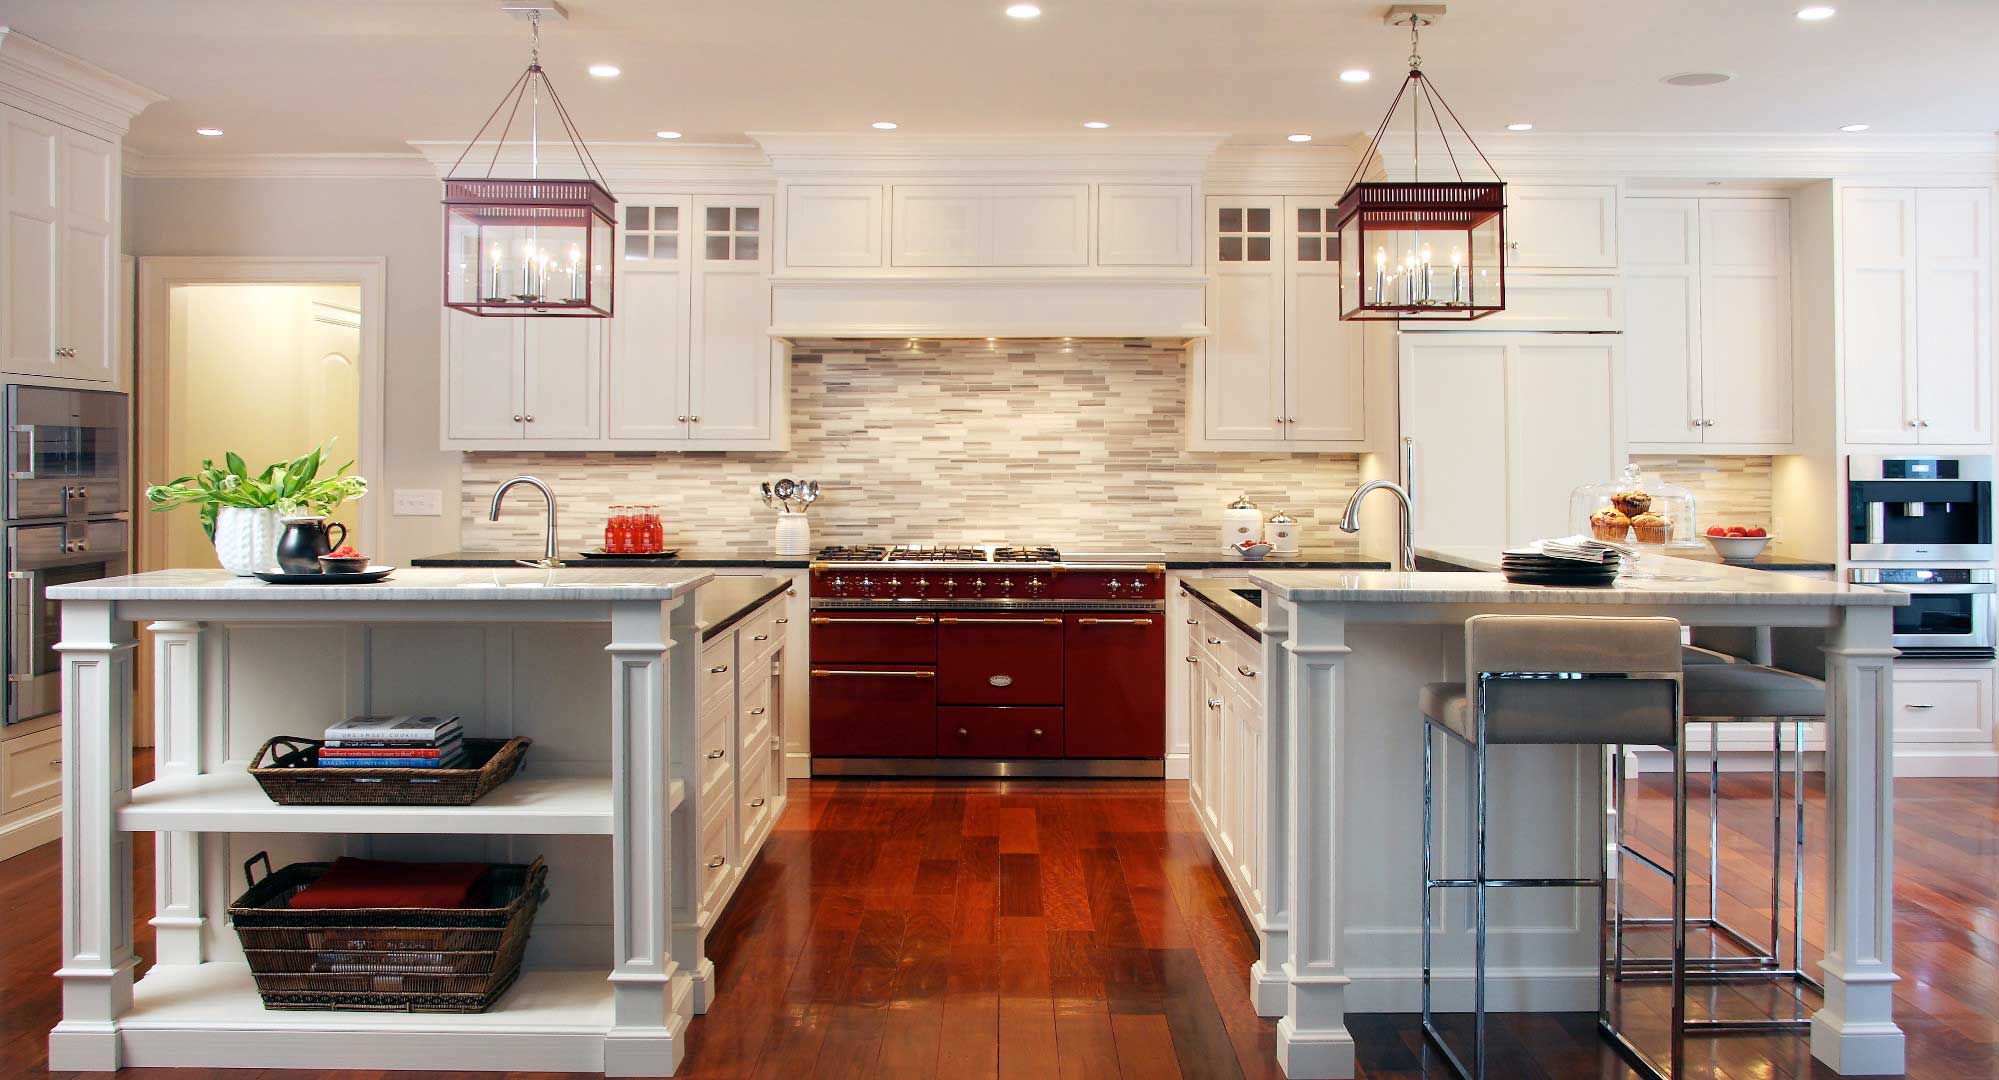 Full View of Kitchen with White Cabinets